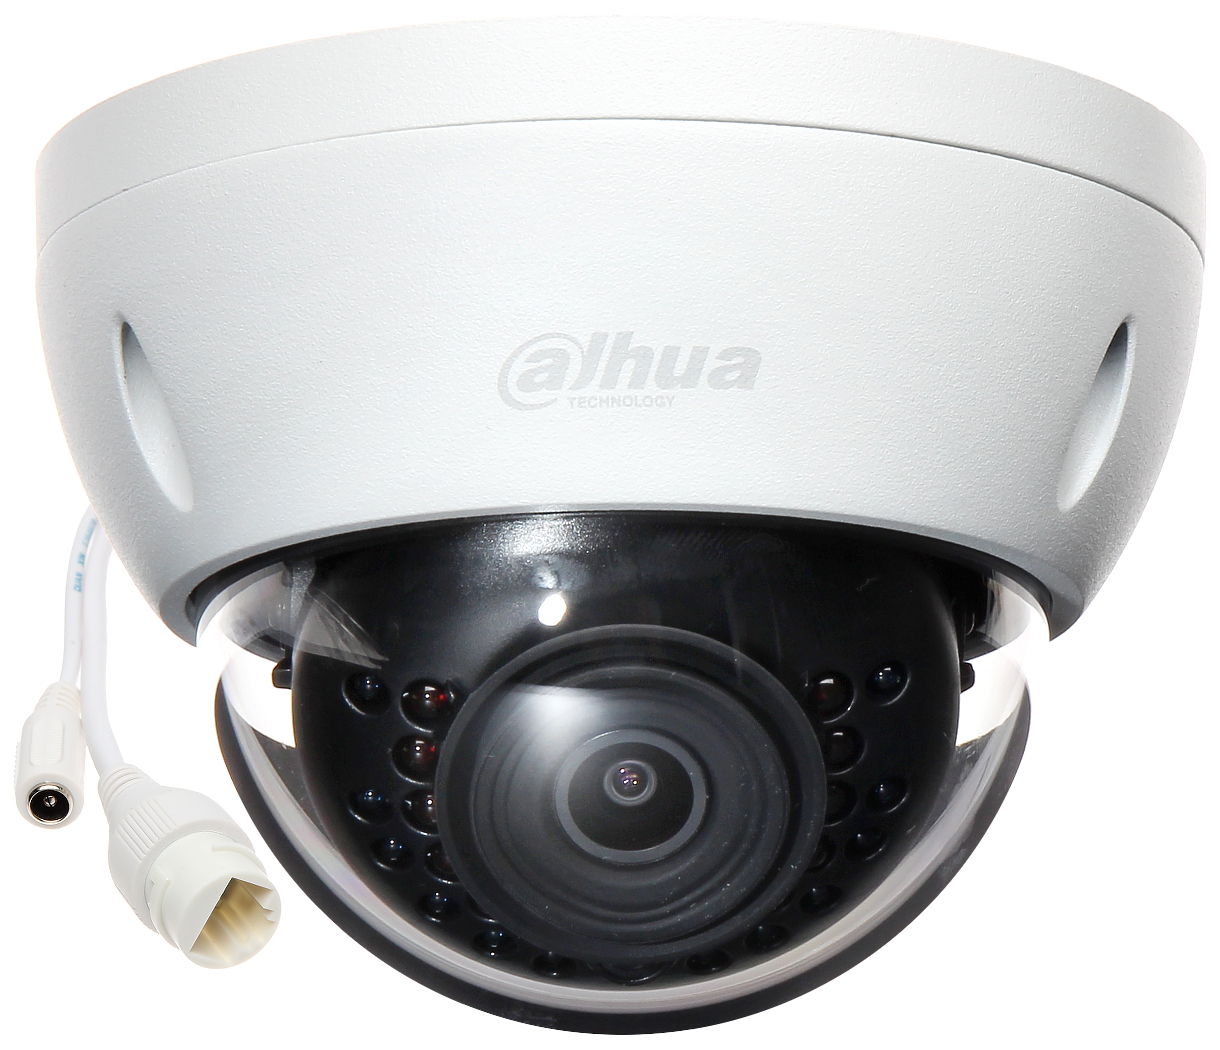 IP VANDALPROOF CAMERA DH-IPC-HDBW1320EP-0280B - 3.0 Mp... - Dome Cameras  with Fixed-Focal Lens and Infra-Red Illum... - Delta